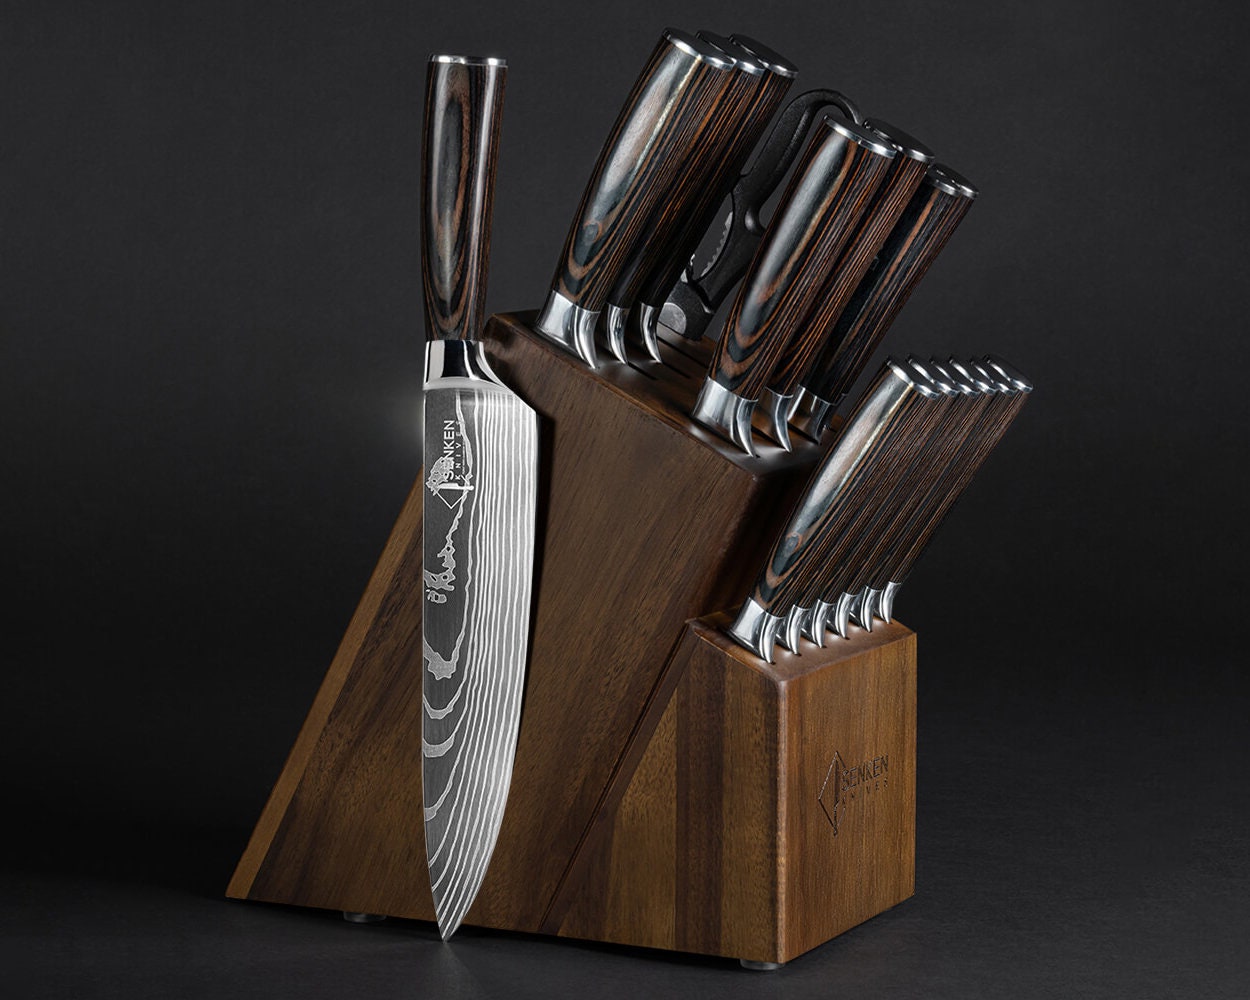 Knife Sets for sale in Sycamore, Georgia, Facebook Marketplace